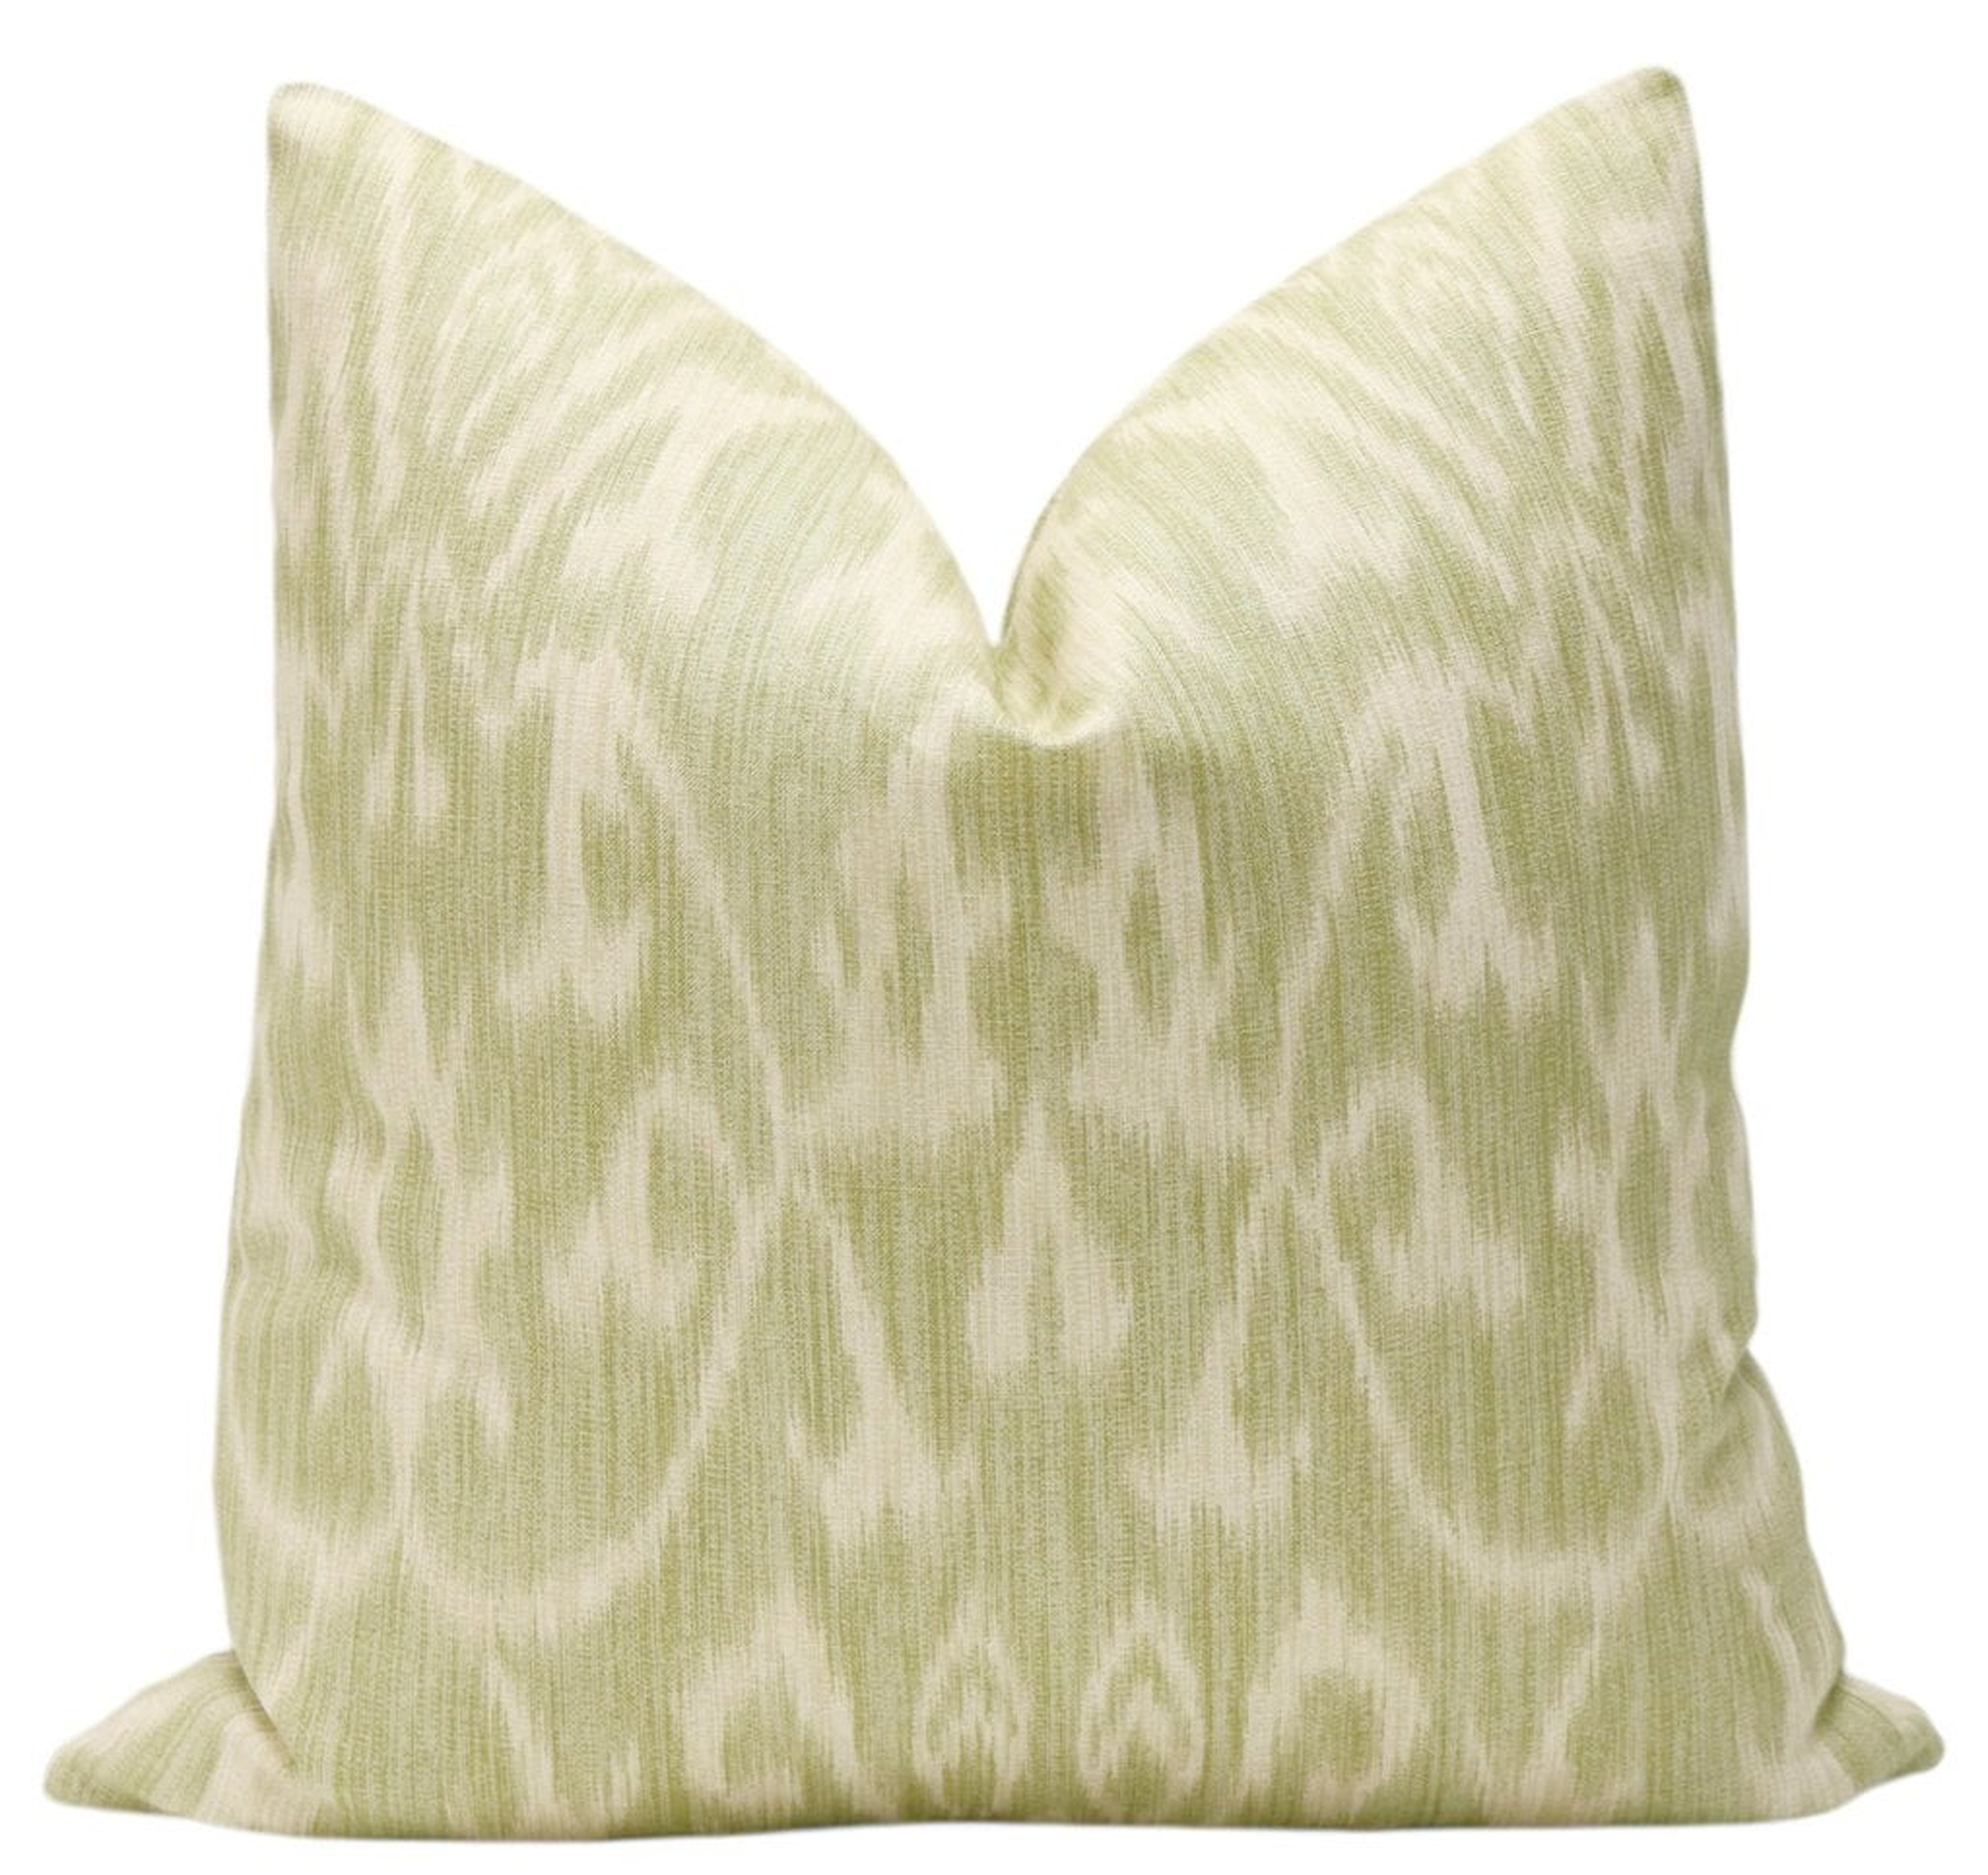 French Ikat Print // Spanish Moss Pillow, 18" Pillow Cover - Little Design Company